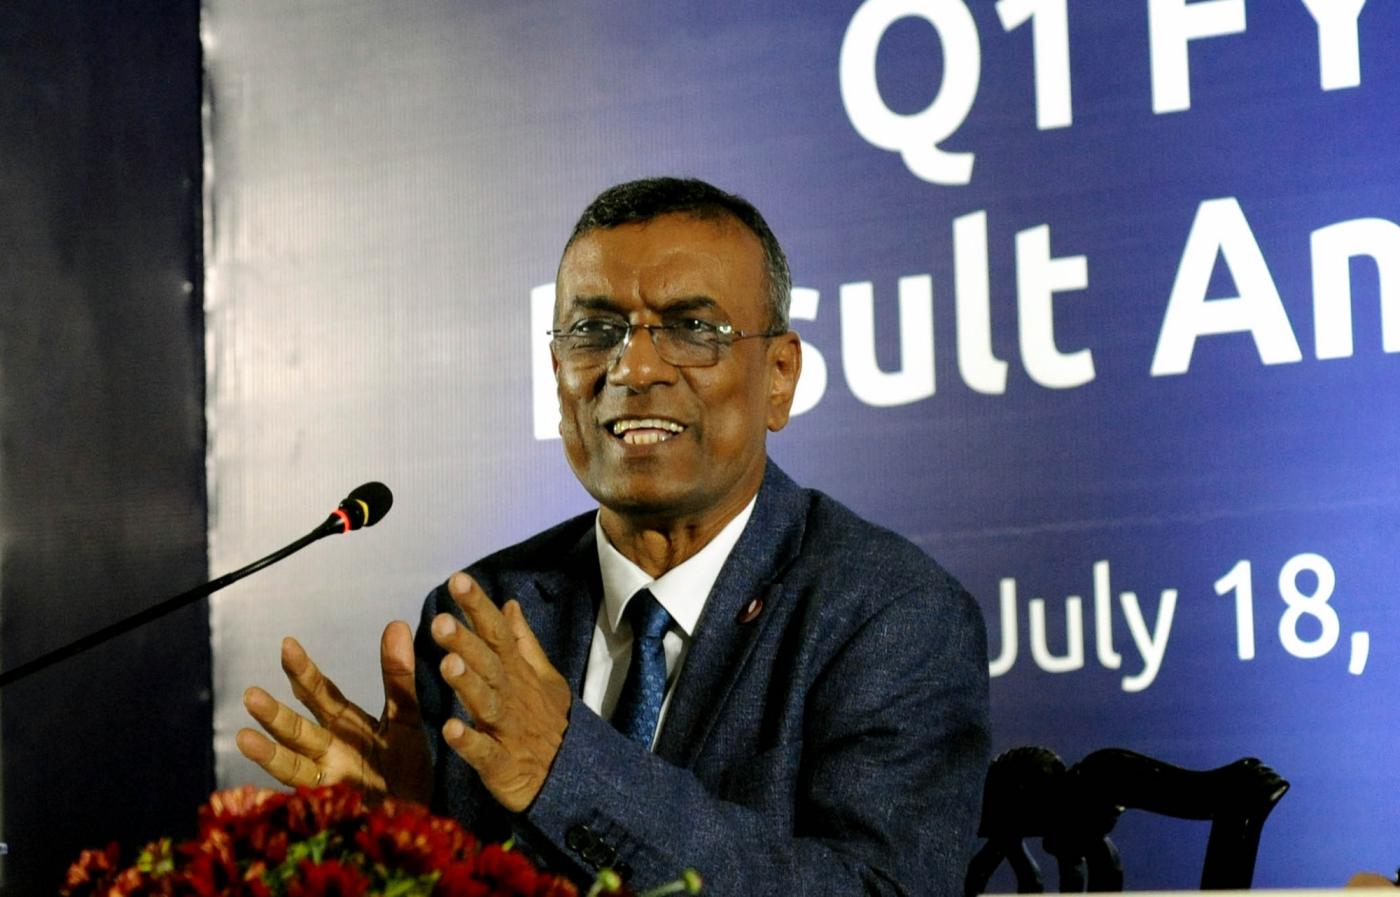 Kolkata: Bandhan Bank CEO and MD Chandra Shekhar Ghosh addresses a press conference at a programme where the bank's first quarter results to the financial year 2018-19 were announced, in Kolkata on July 18, 2018. (Photo: Kuntal Chakrabarty/IANS) by .